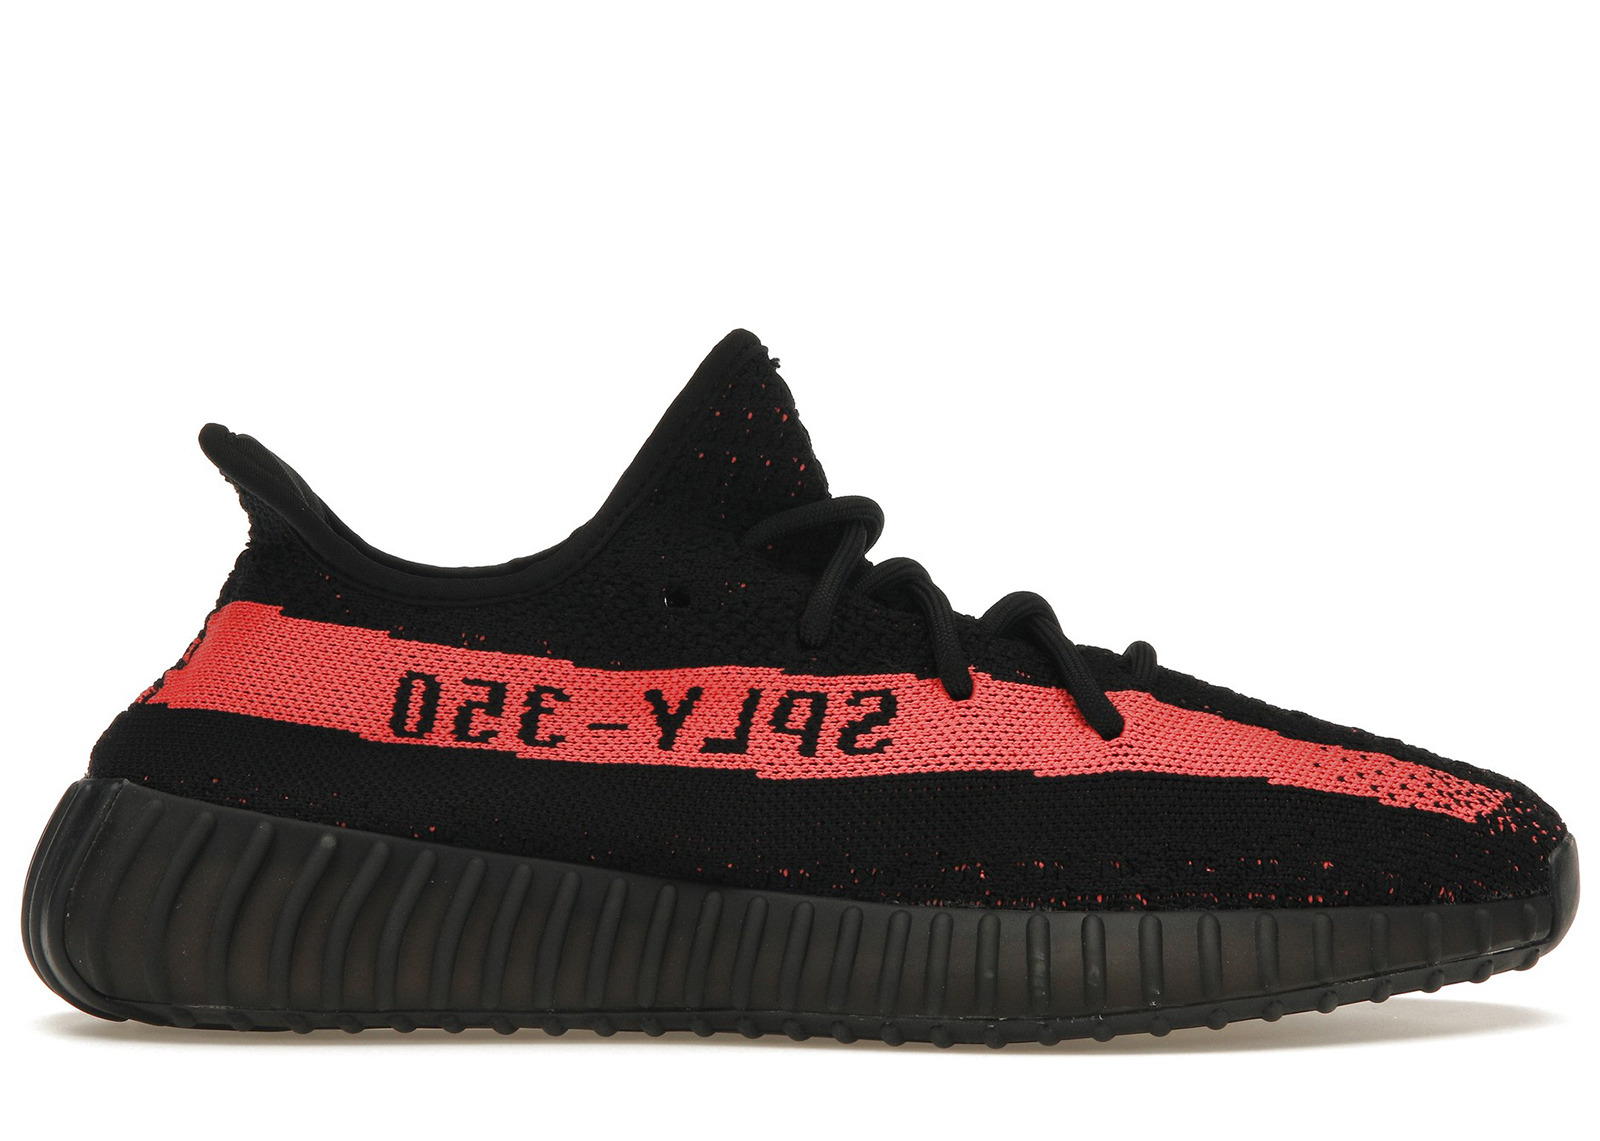 adidas YEEZY Boost 350 V2 Core Black/Red即決４３０００円可能でしょうか